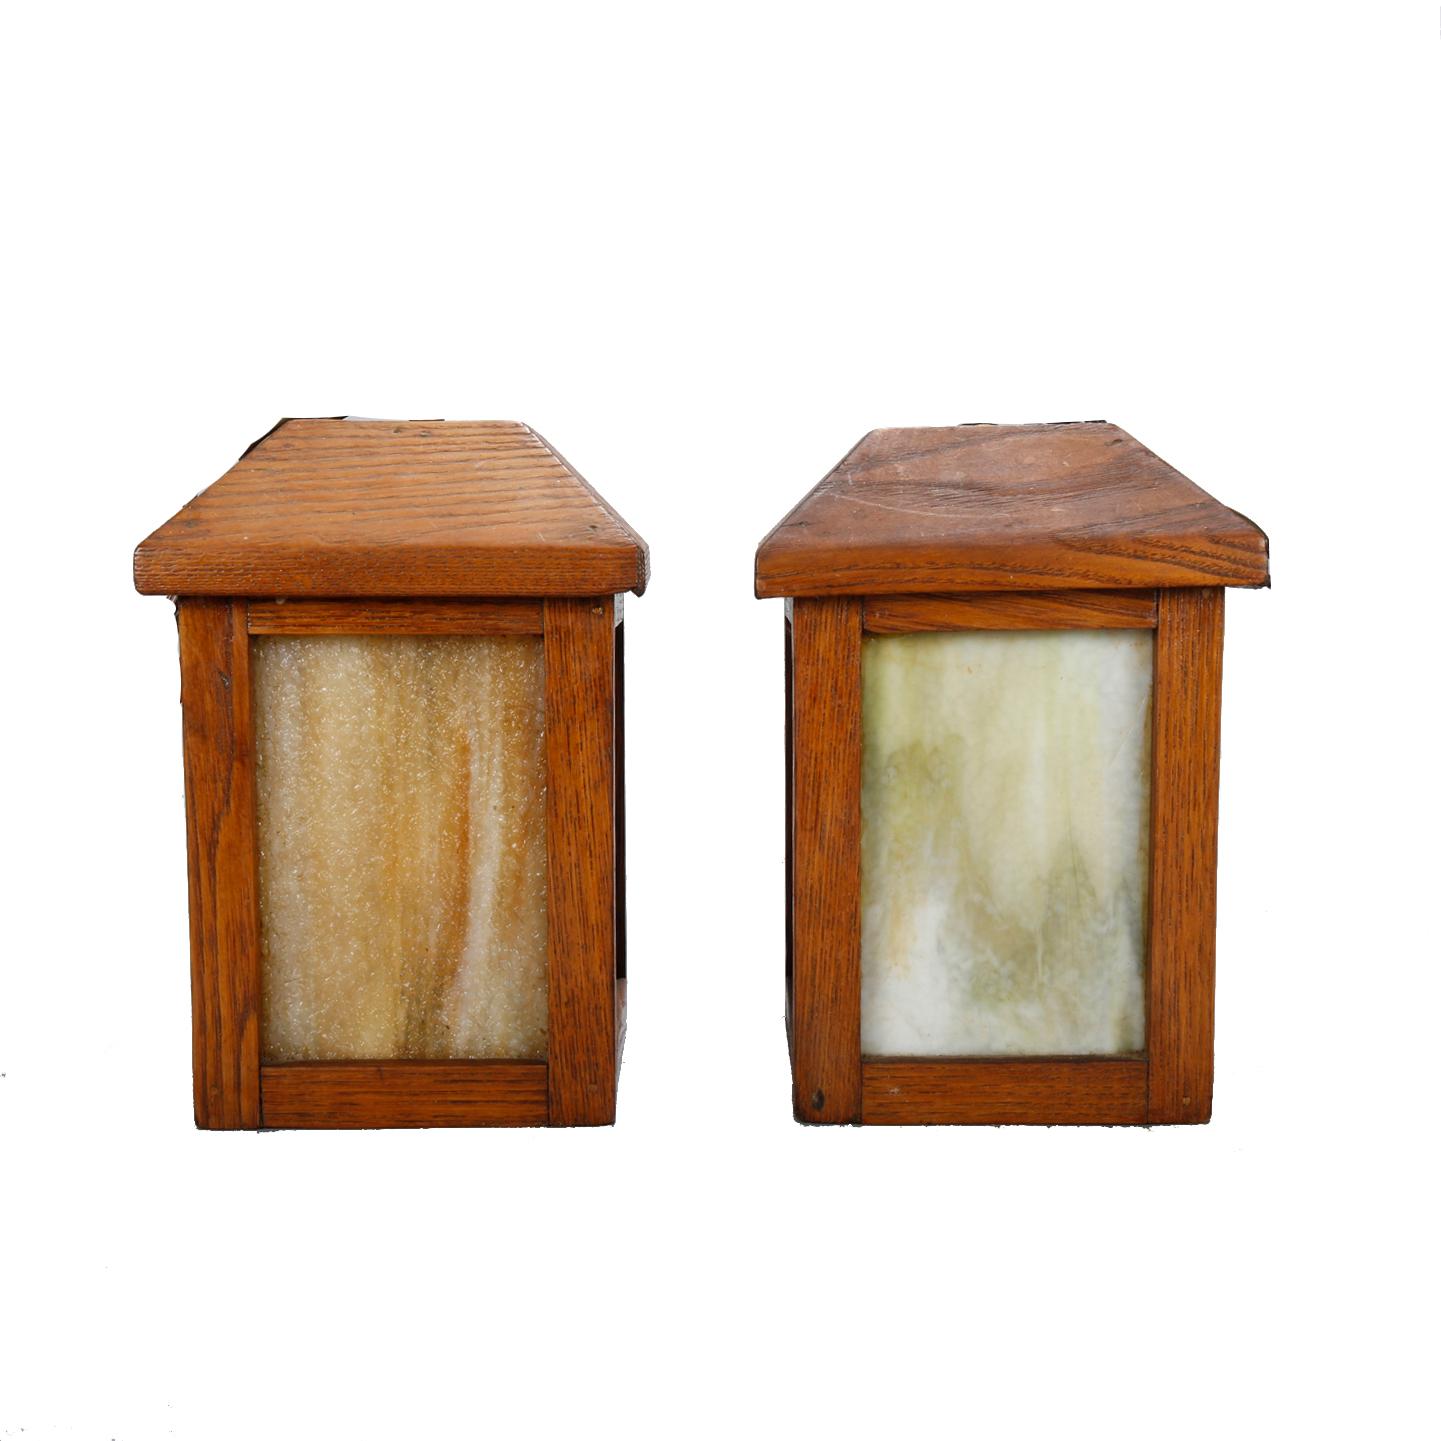 An antique pair of Arts & Crafts Mission hanging lights offer oak construction in lantern form with slag glass panels and single sockets, professionally wired for US electricity, circa 1910.

Measures: 11